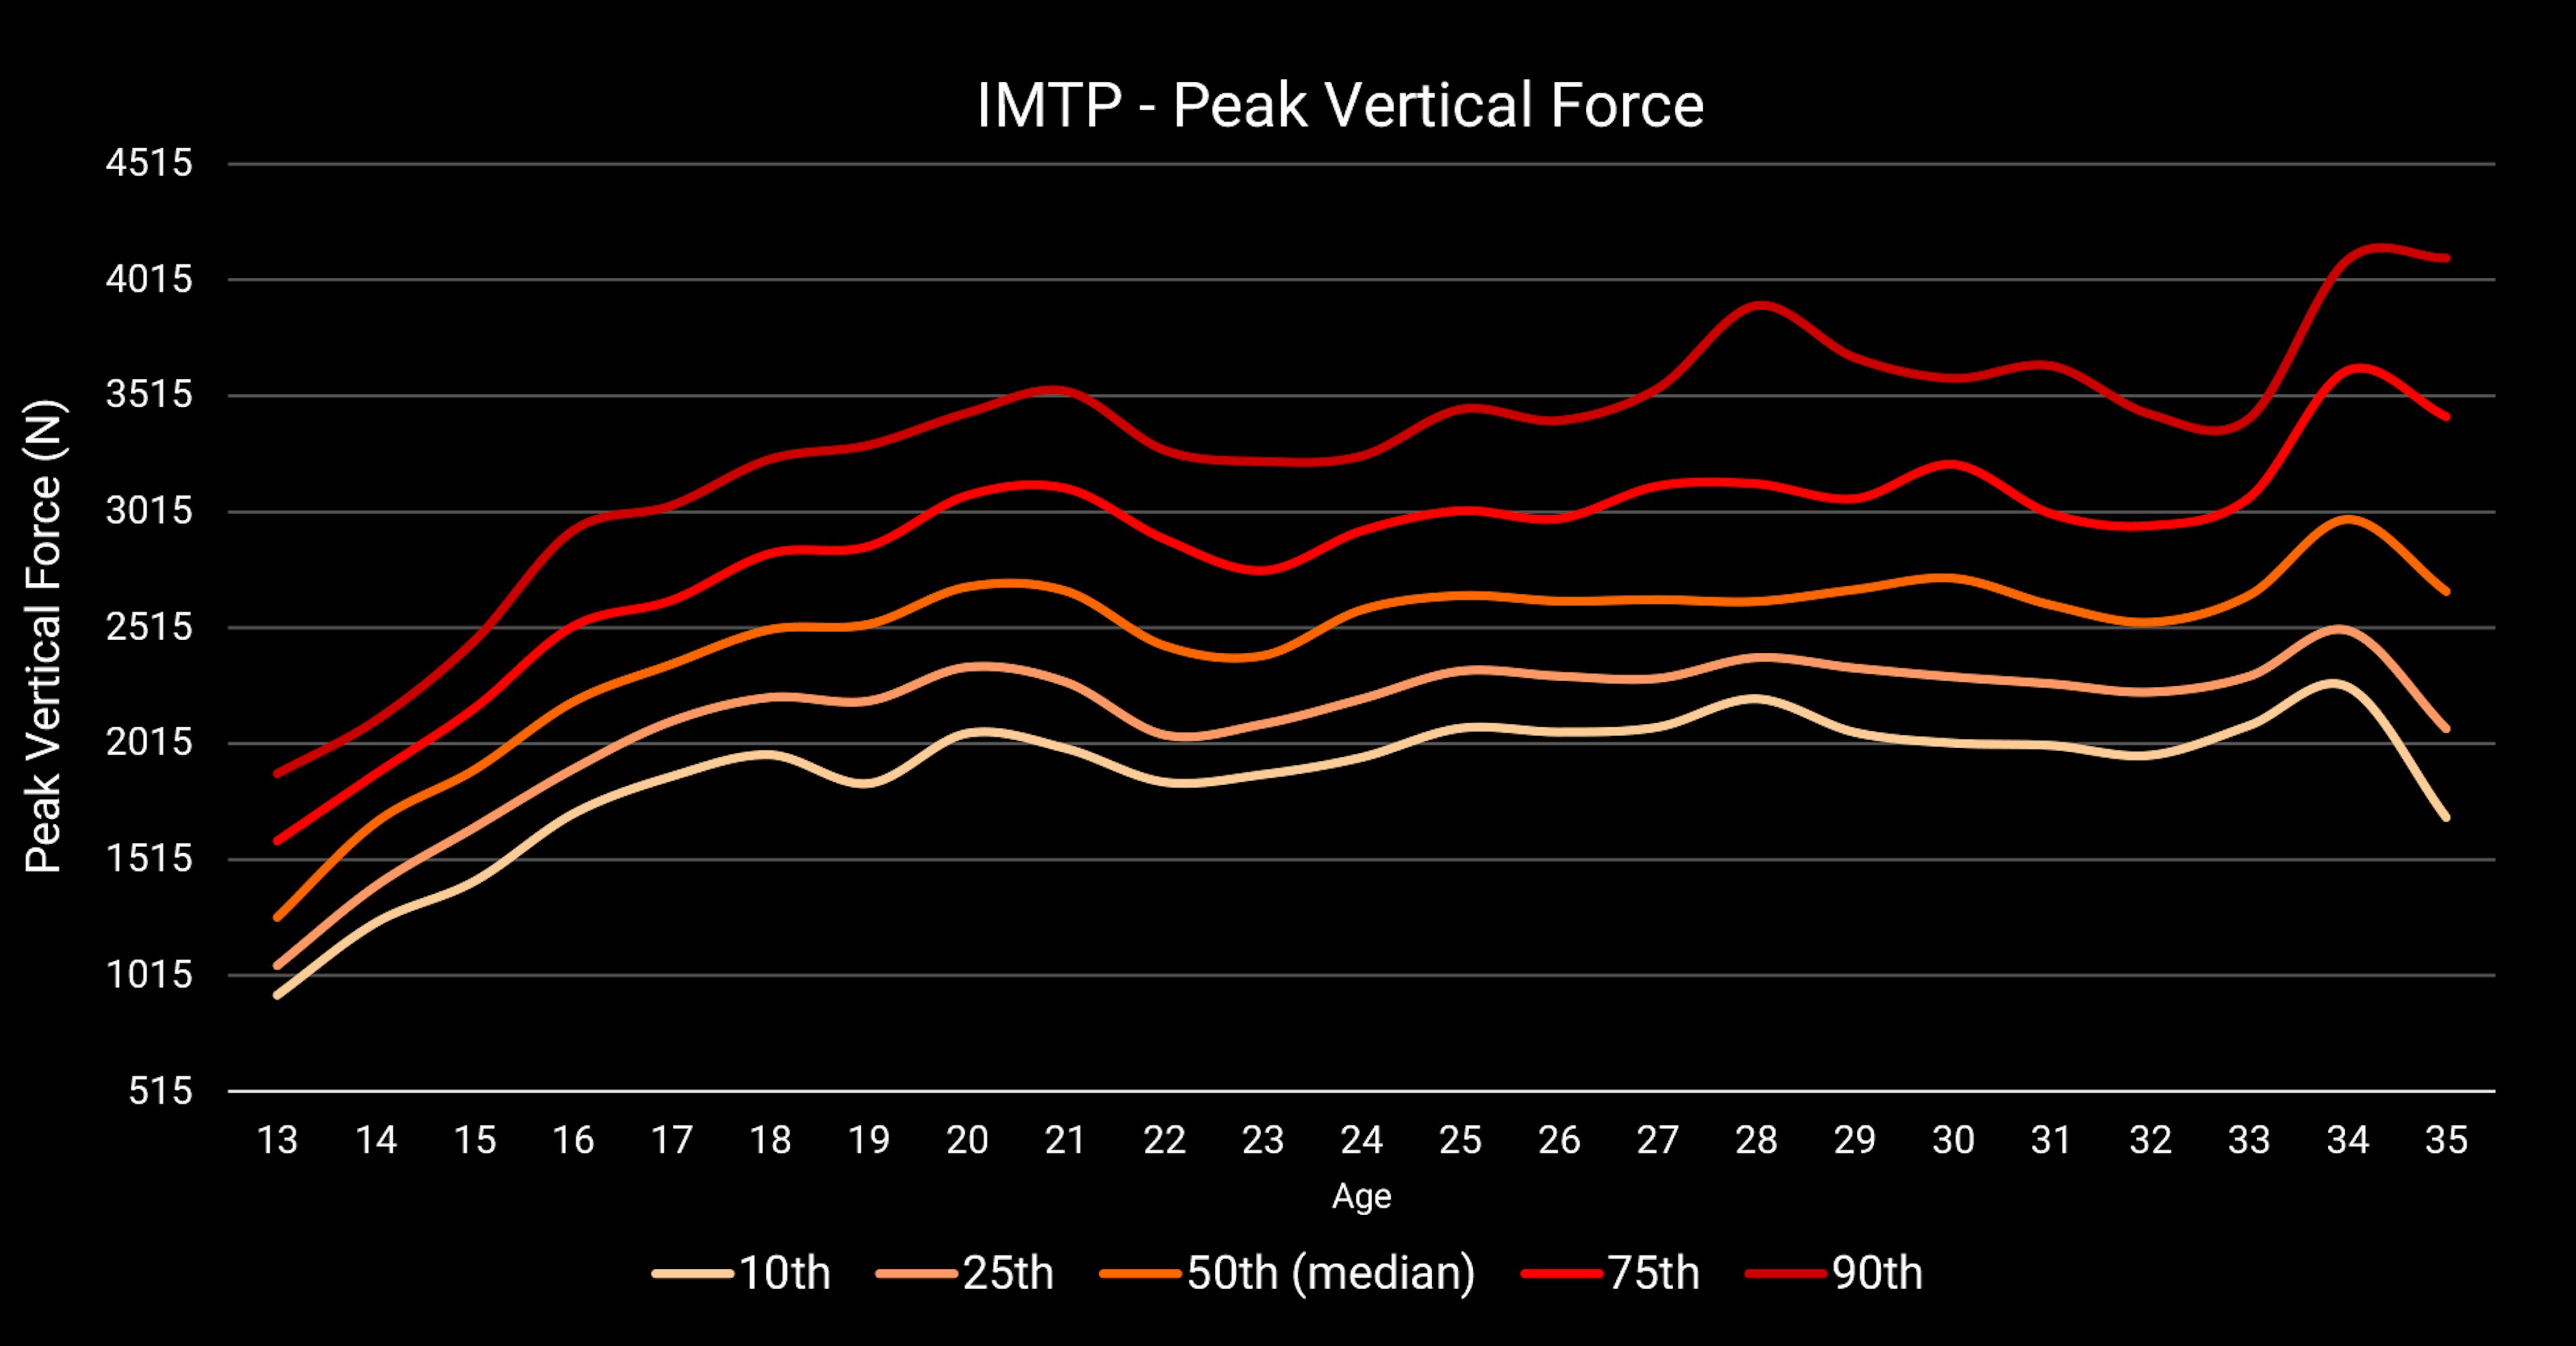 Normative data for Peak Vertical Force (N) from the IMTP test showing development trends of professional footballers from age 13 to 35 years (data captured with ForceDecks).